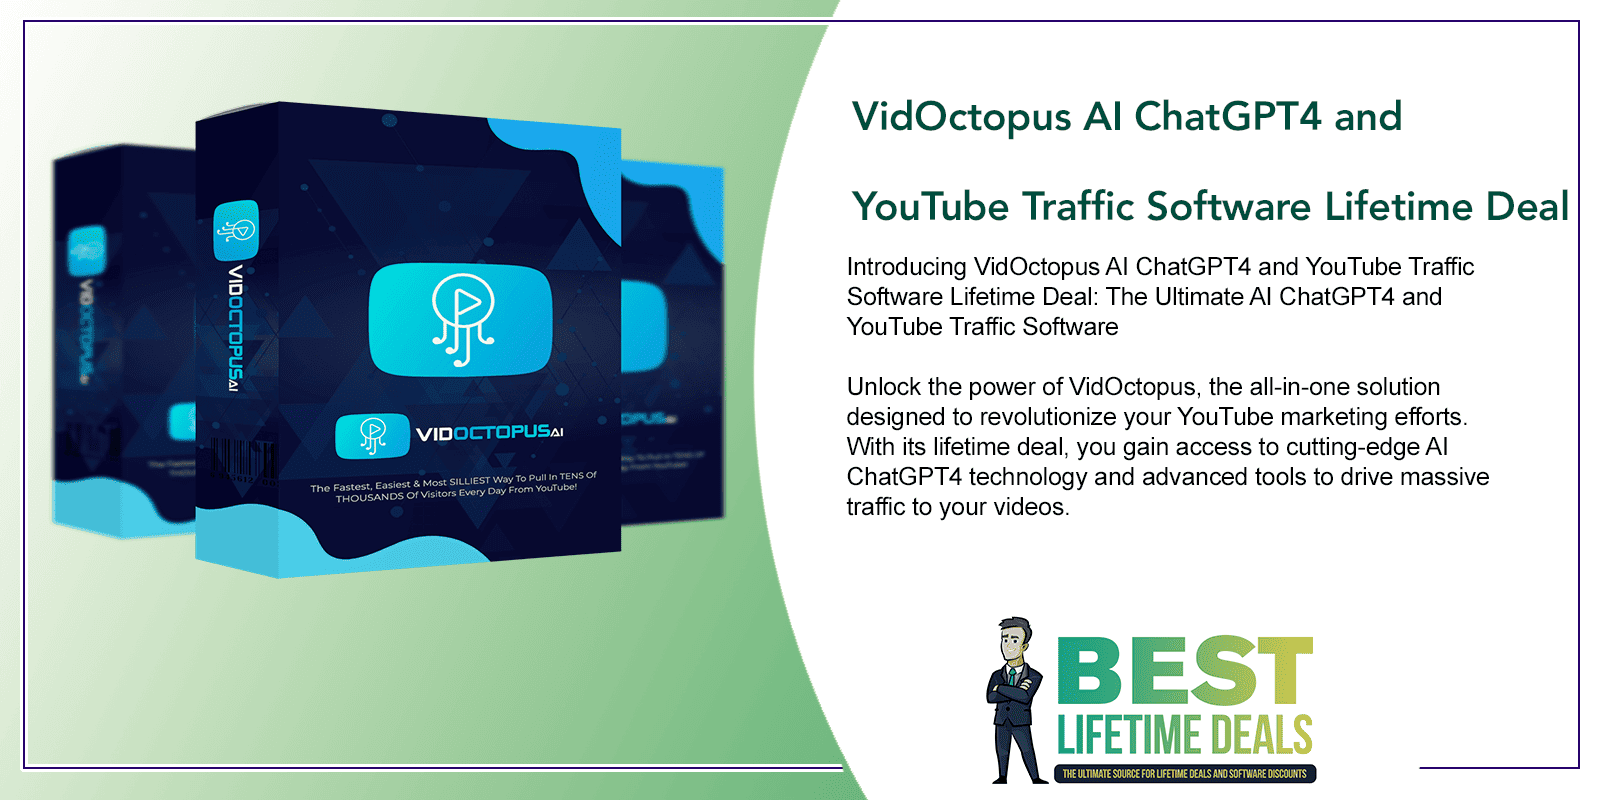 VidOctopus AI ChatGPT4 and YouTube Traffic Software Lifetime Deal Featured Image